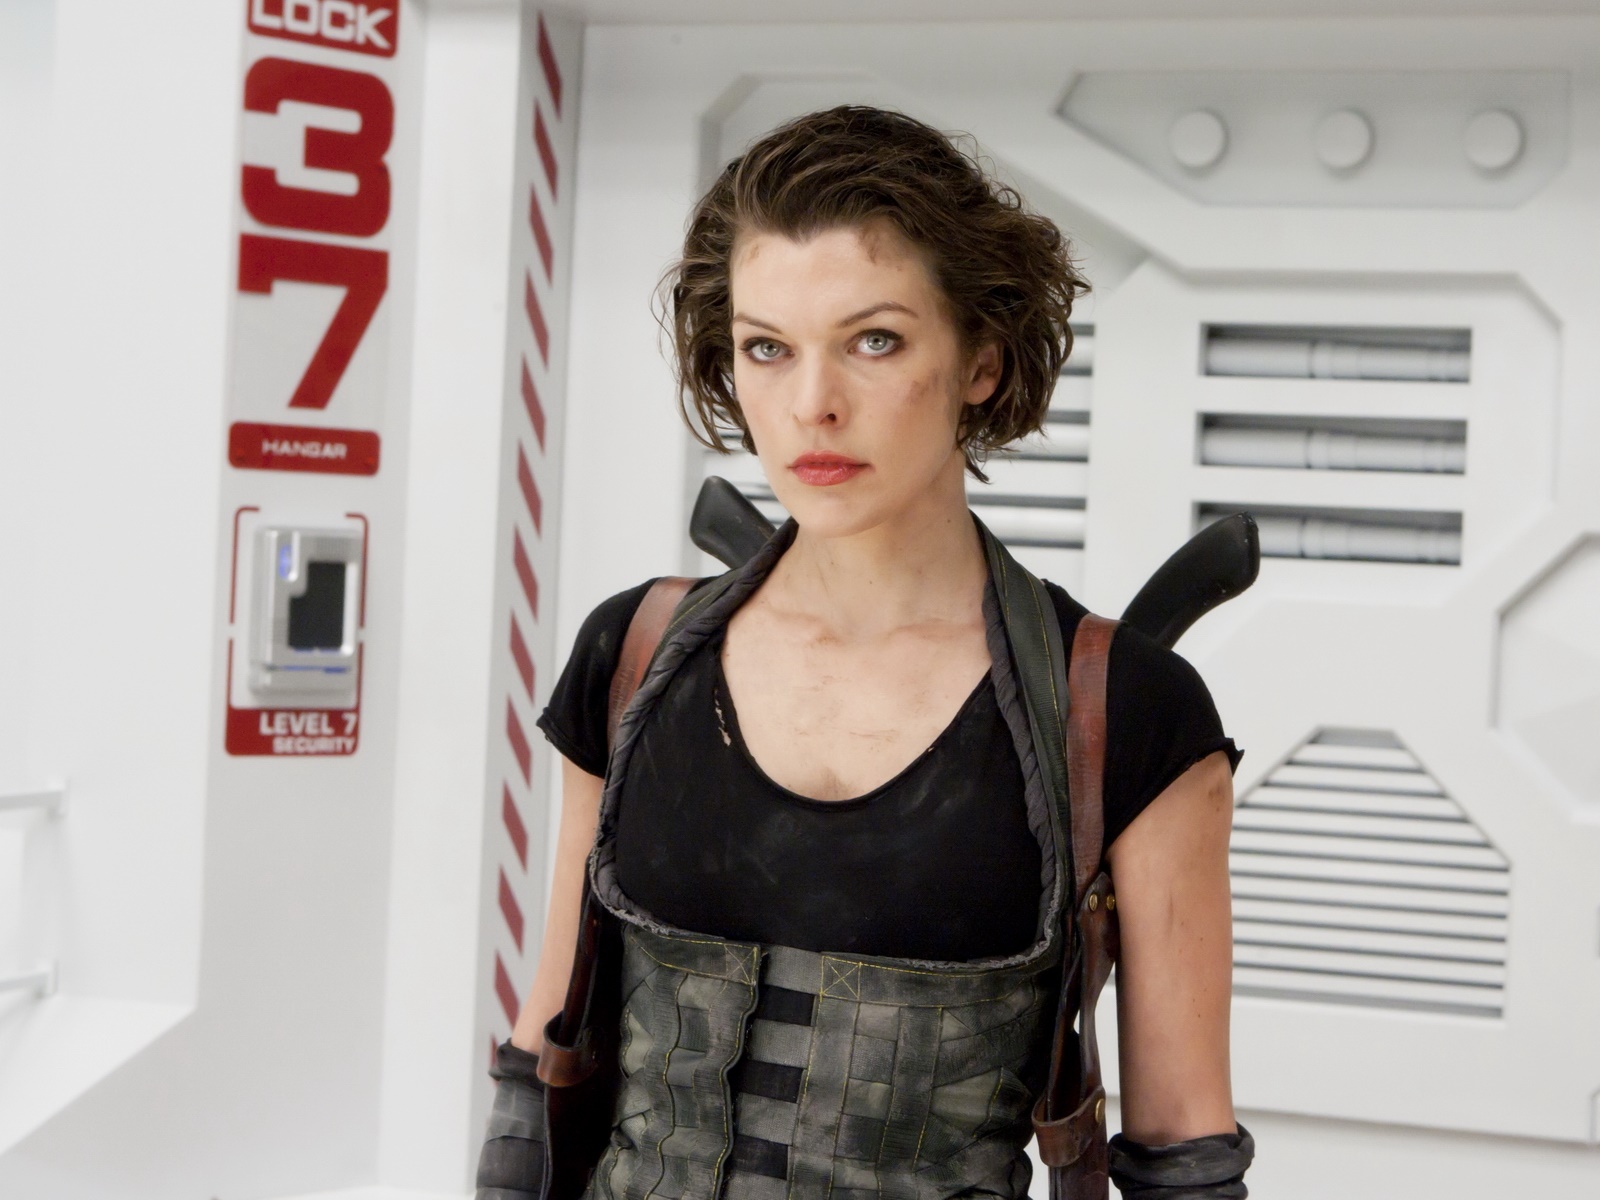 resident evil final chapter free download hd